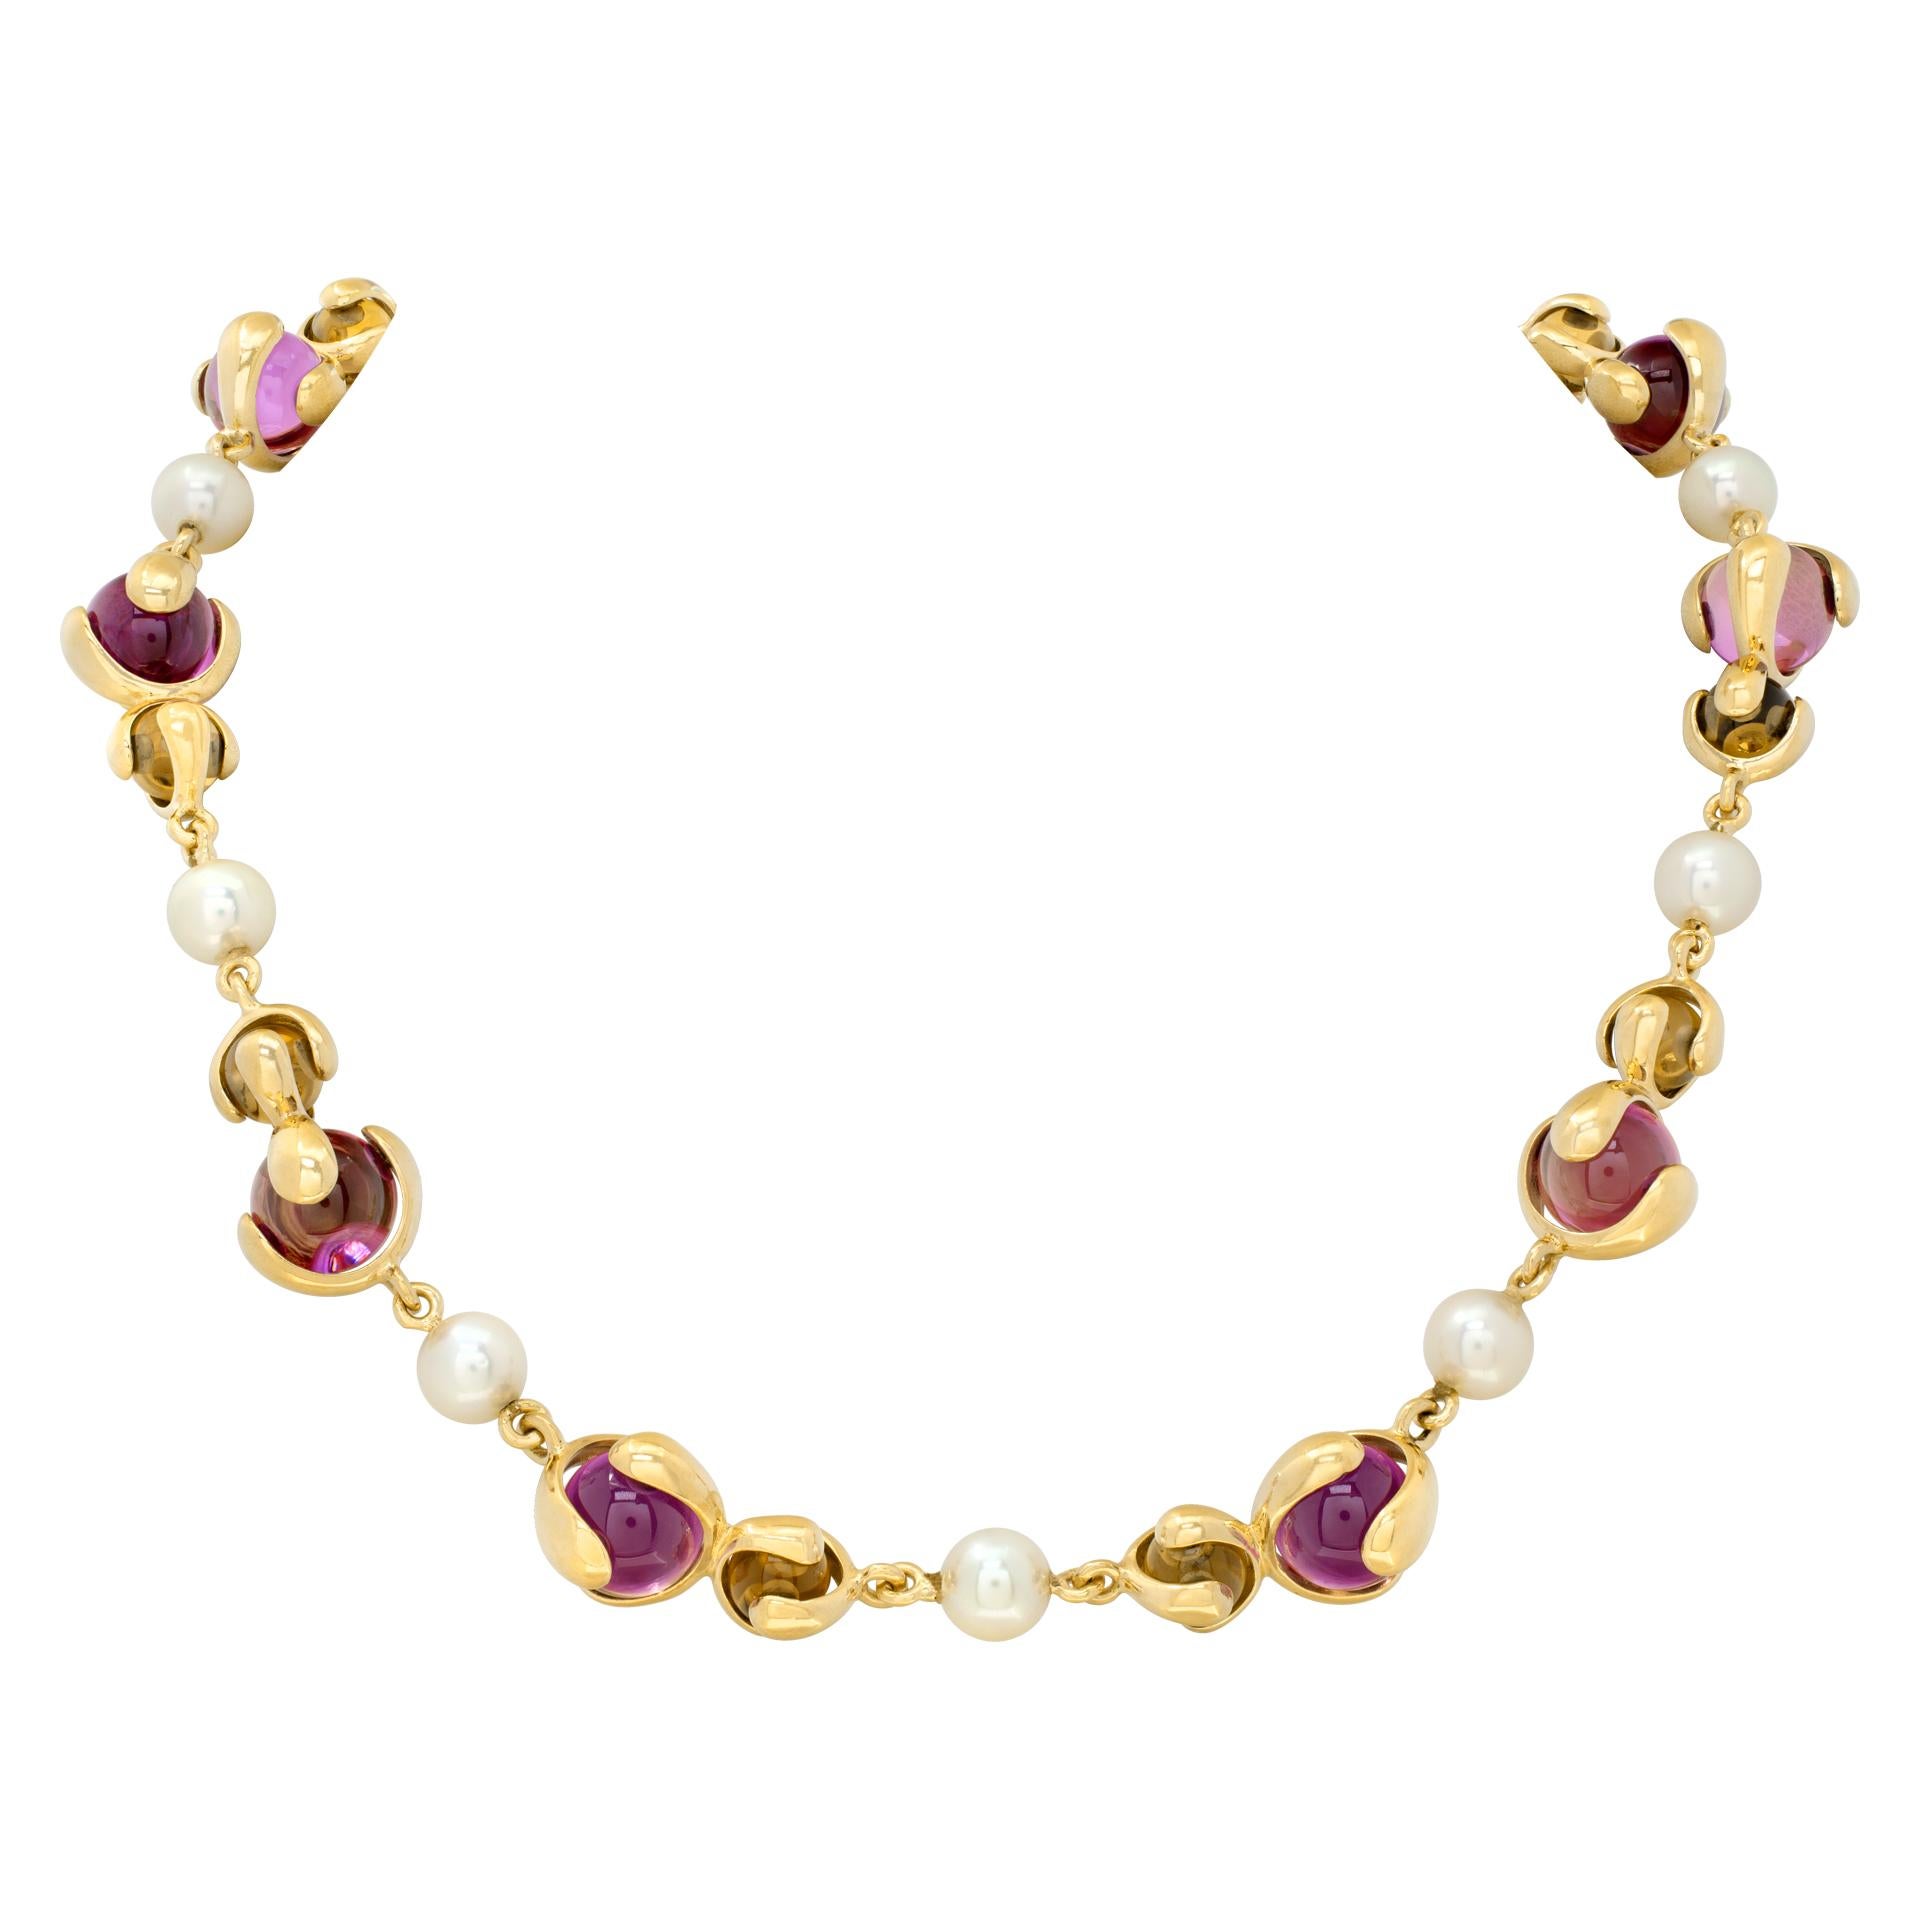 Yellow gold Marina B Cardan Necklace w/ pink Russian quartz, citrine and pearls